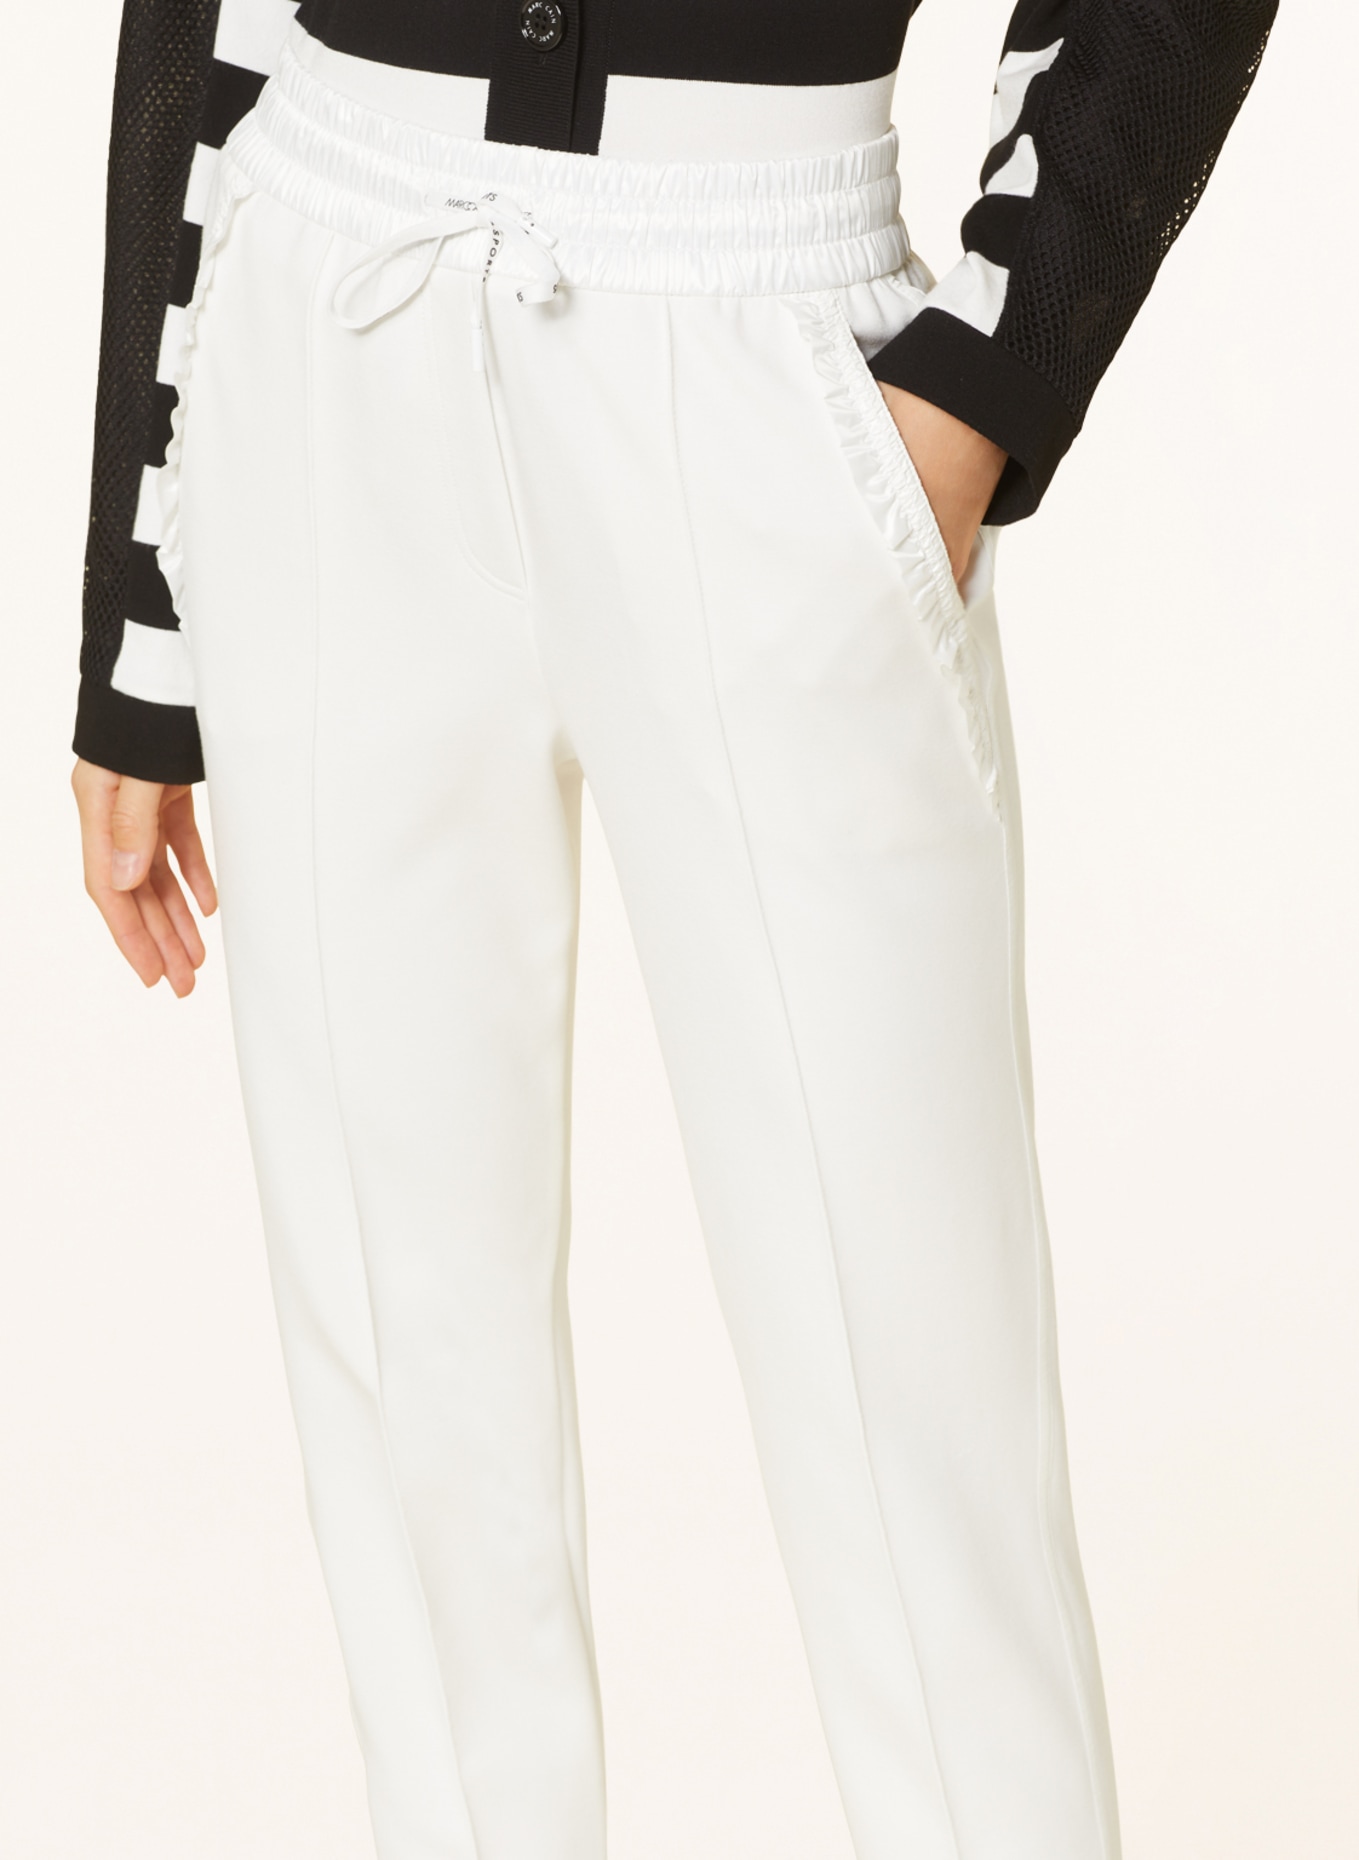 MARC CAIN Pants in jogger style, Color: 110 off (Image 5)